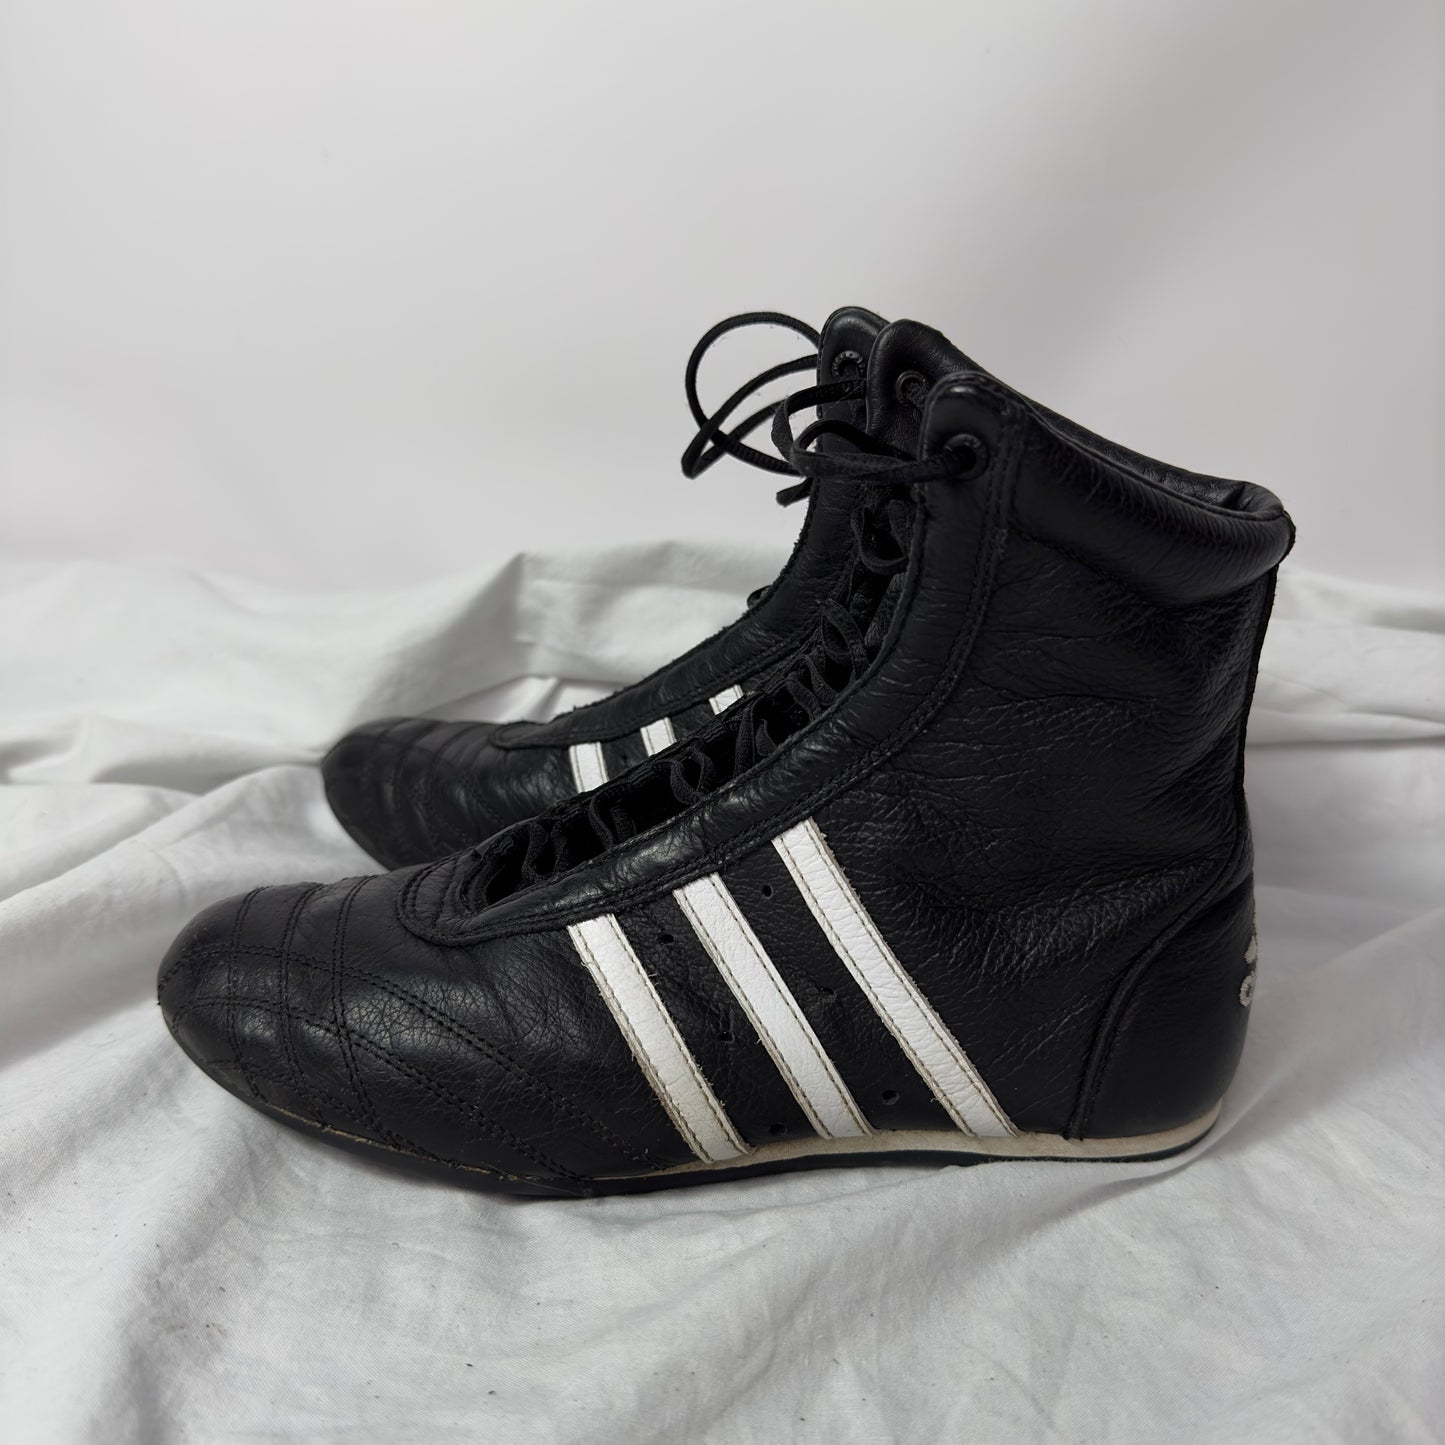 Adidas 2000s Leather Vintage Boxing wrestling Boots